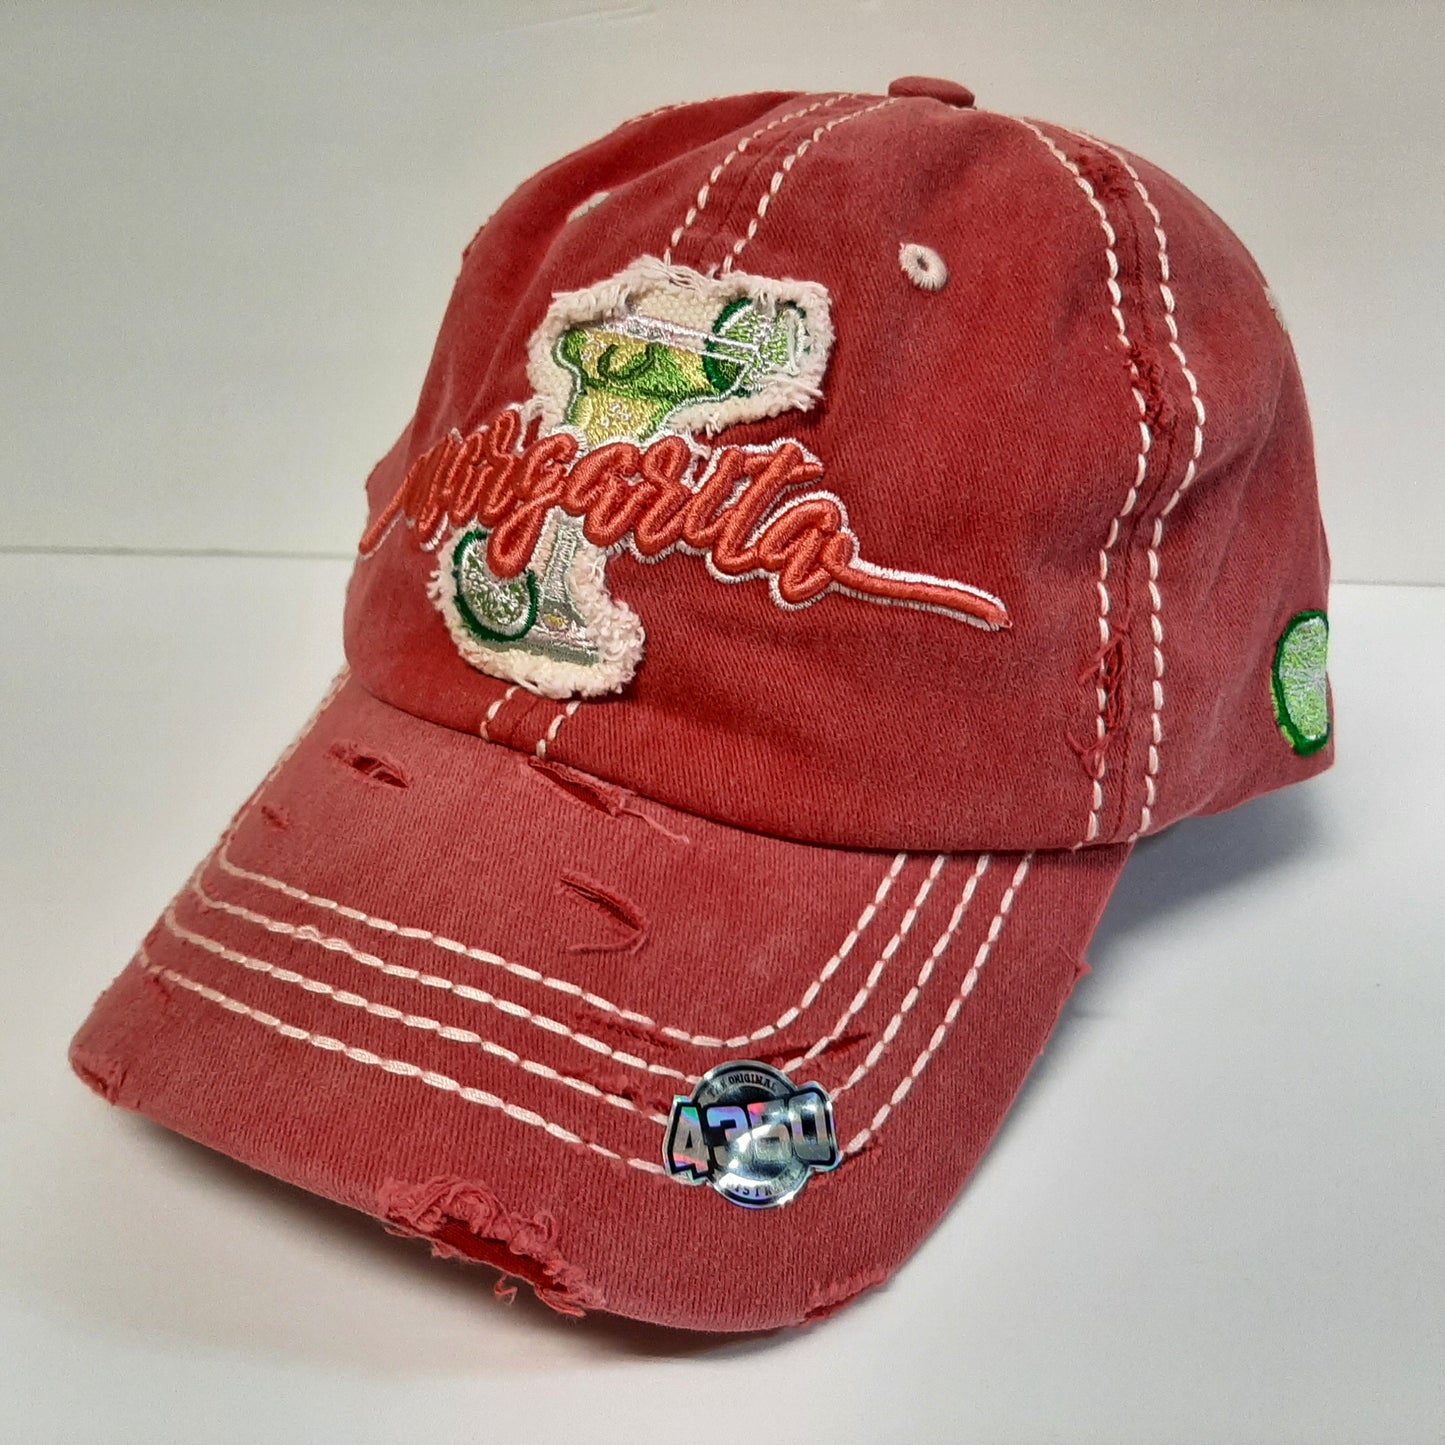 MARGARITA Women's Relaxed Distressed Cap Salmon Red Cotton